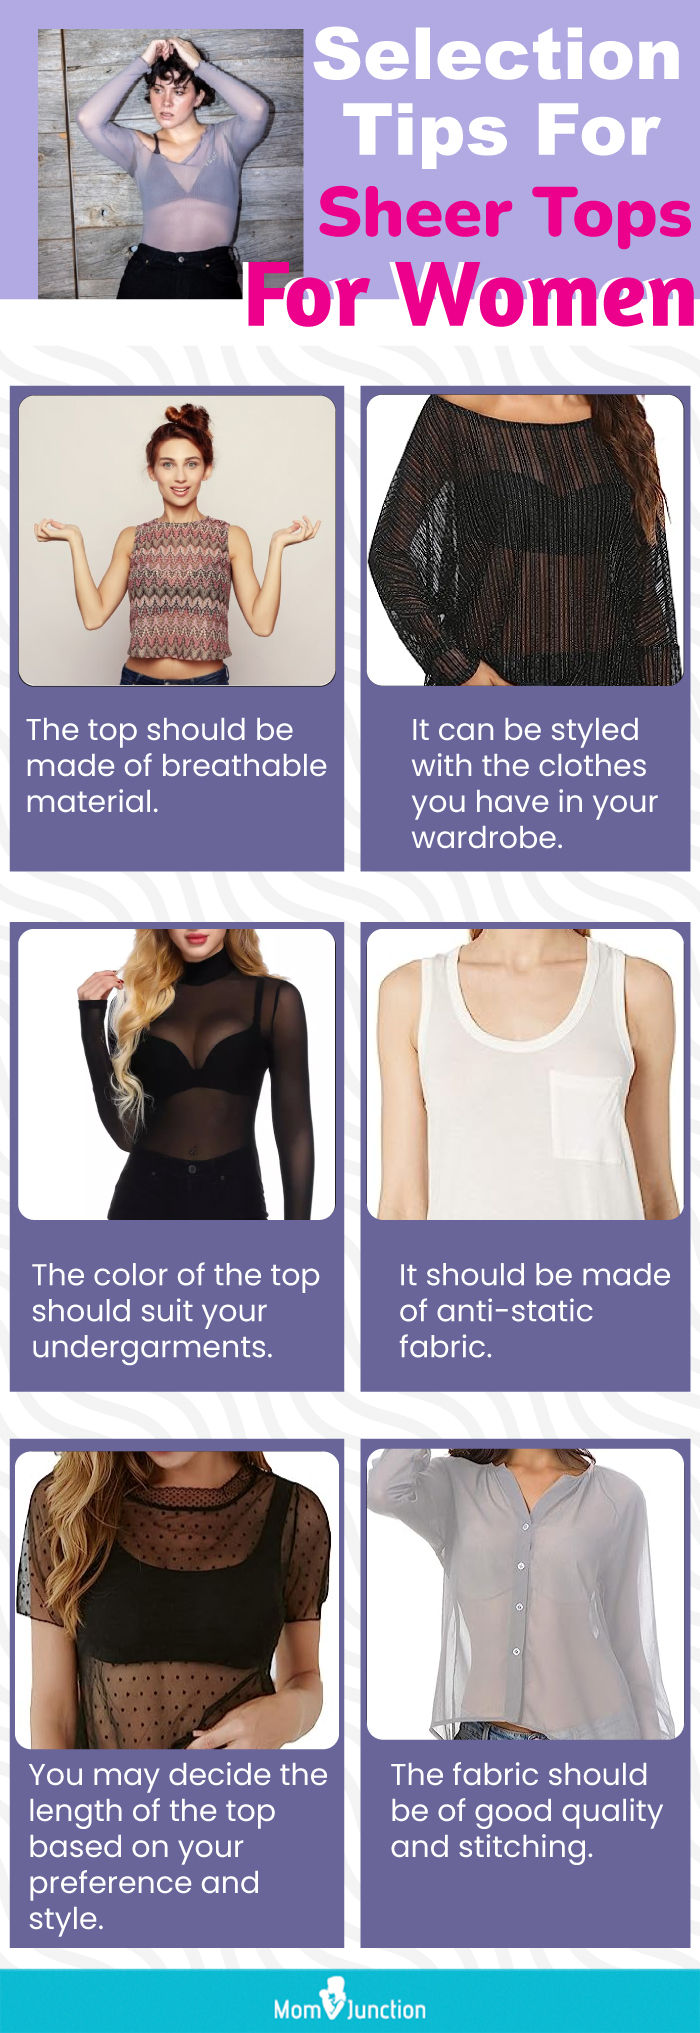 Selection Tips For Sheer Tops For Women (infographic)